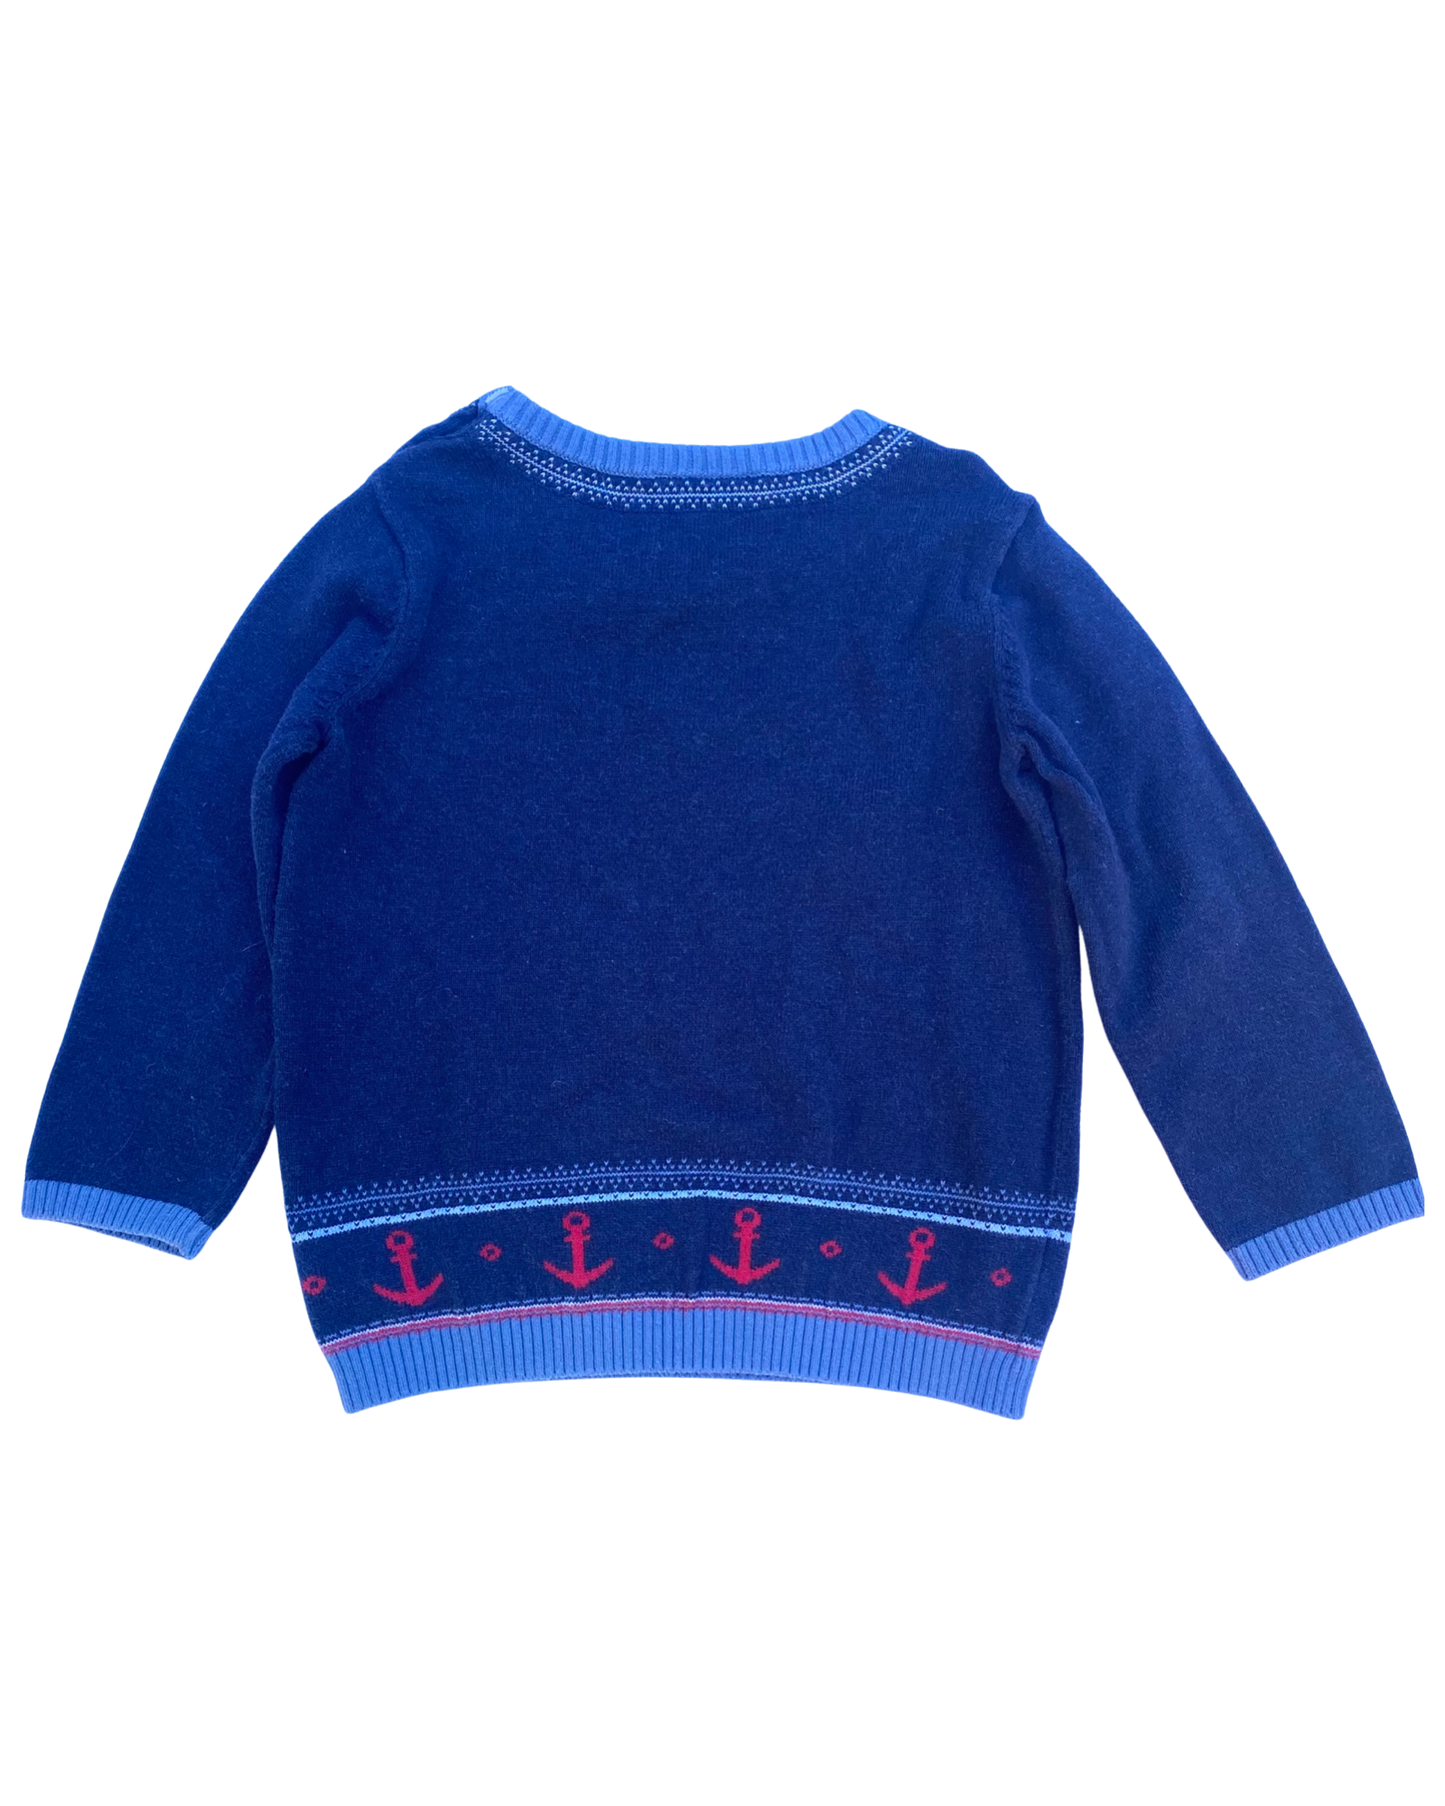 The Little White Company navy knitted anchor jumper (size 18-24mths)